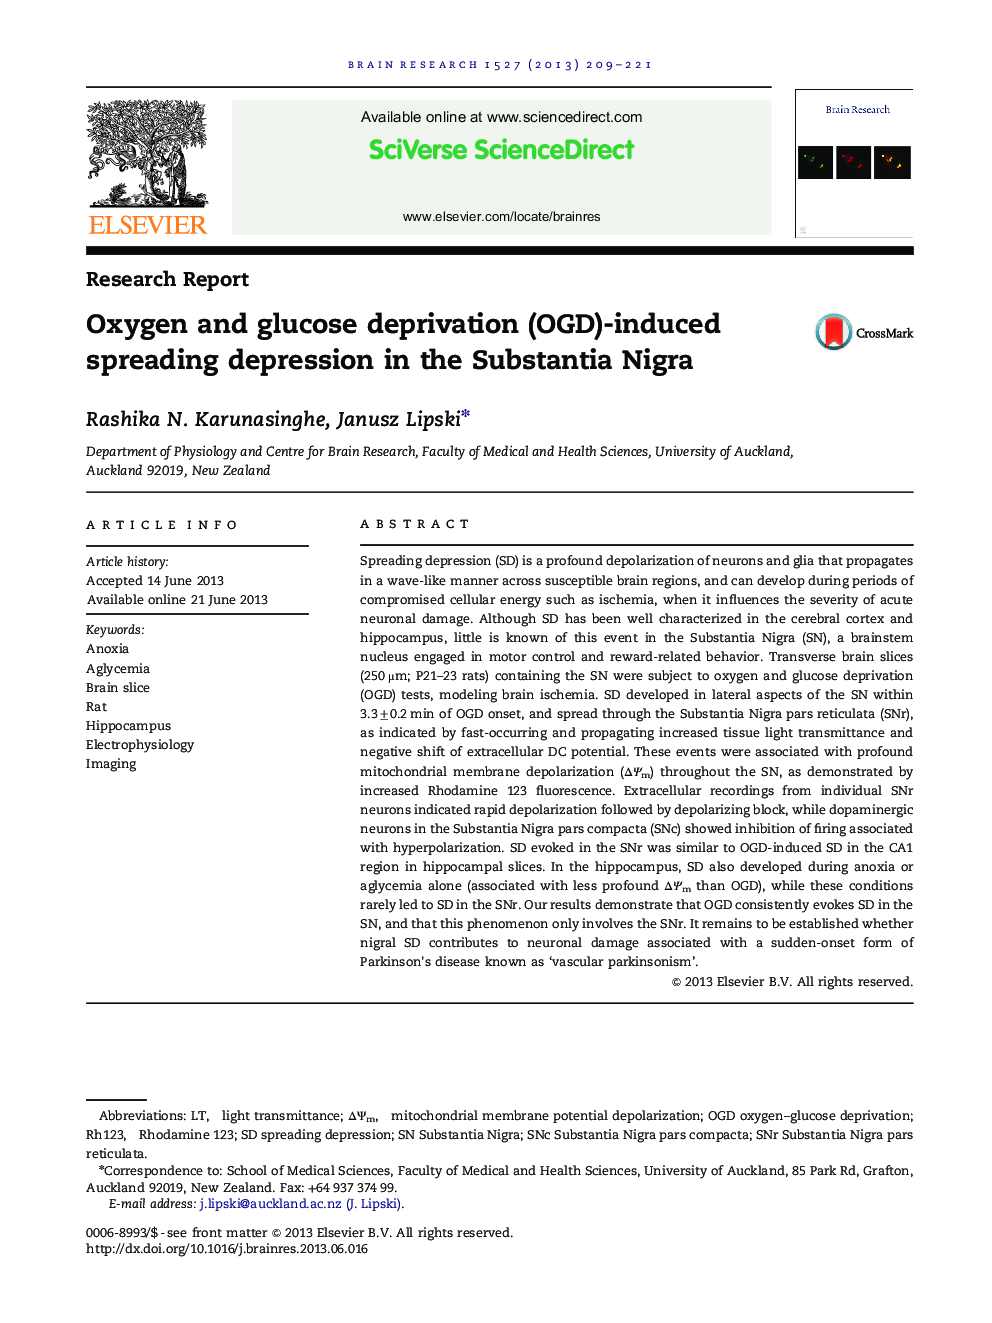 Oxygen and glucose deprivation (OGD)-induced spreading depression in the Substantia Nigra